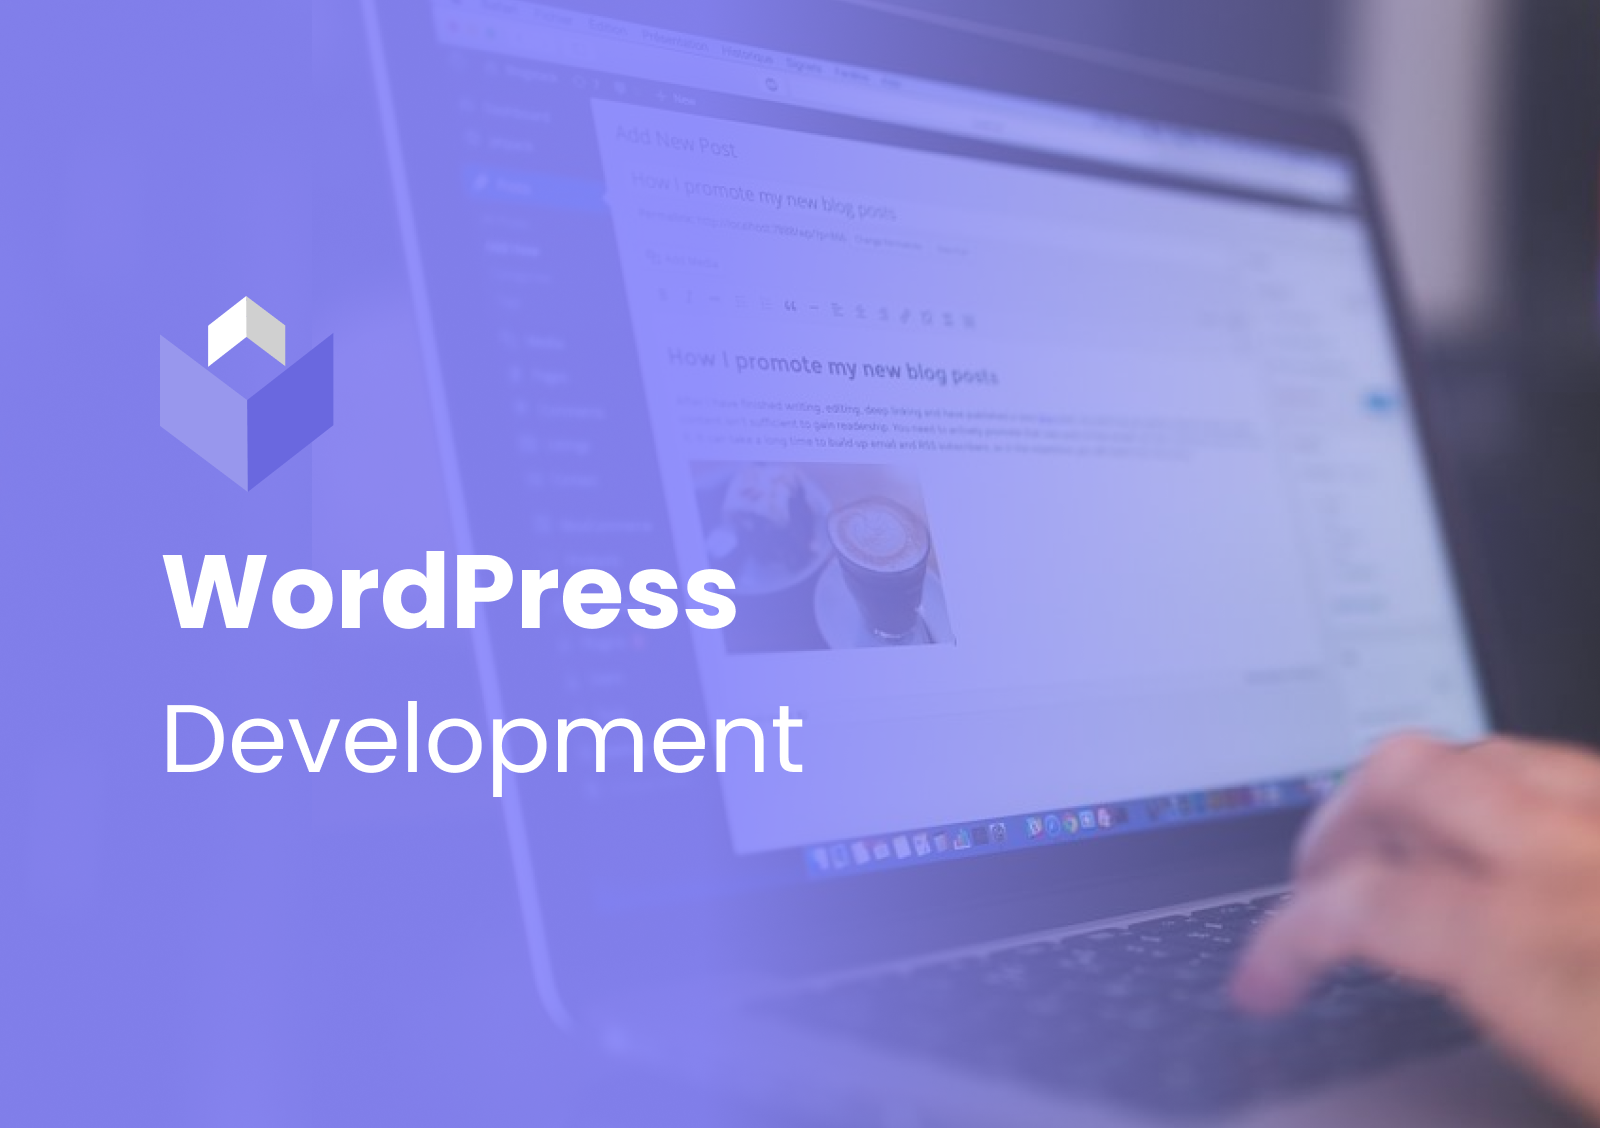 Welcome to the course on WordPress Development. This class will focus on WordPress's design and developing setting